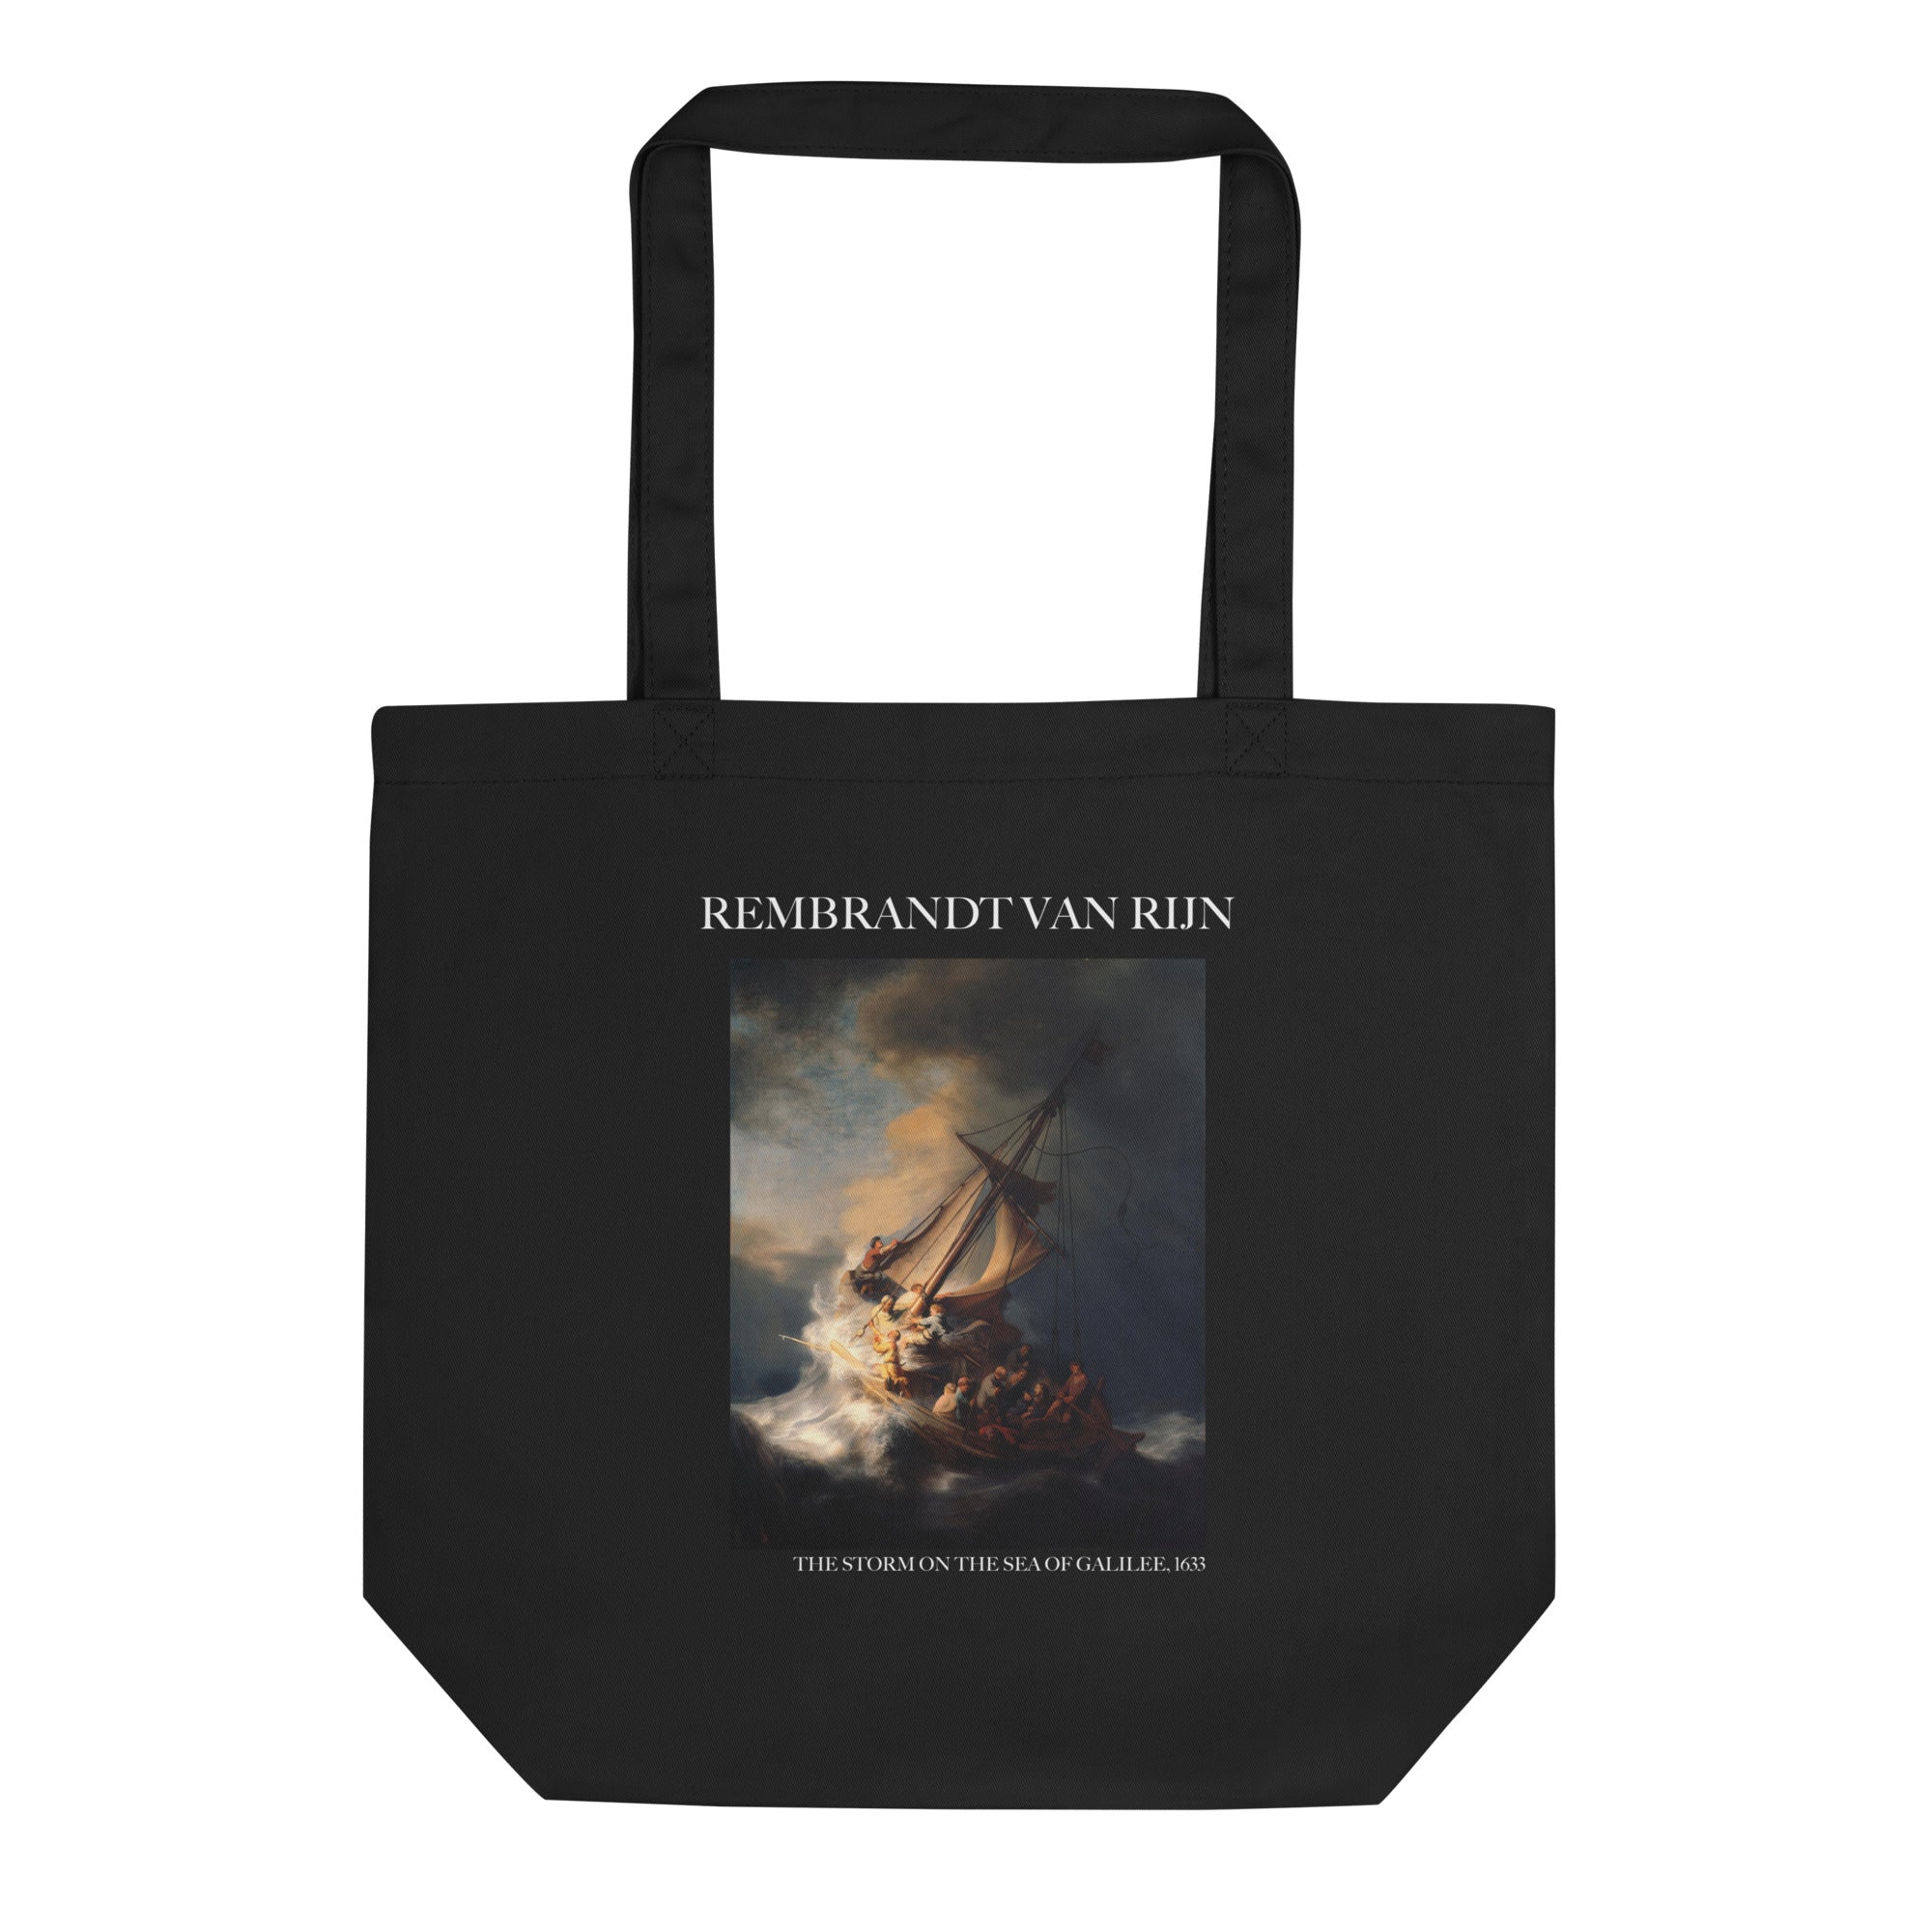 Rembrandt van Rijn 'The Storm on the Sea of Galilee' Famous Painting Totebag | Eco Friendly Art Tote Bag